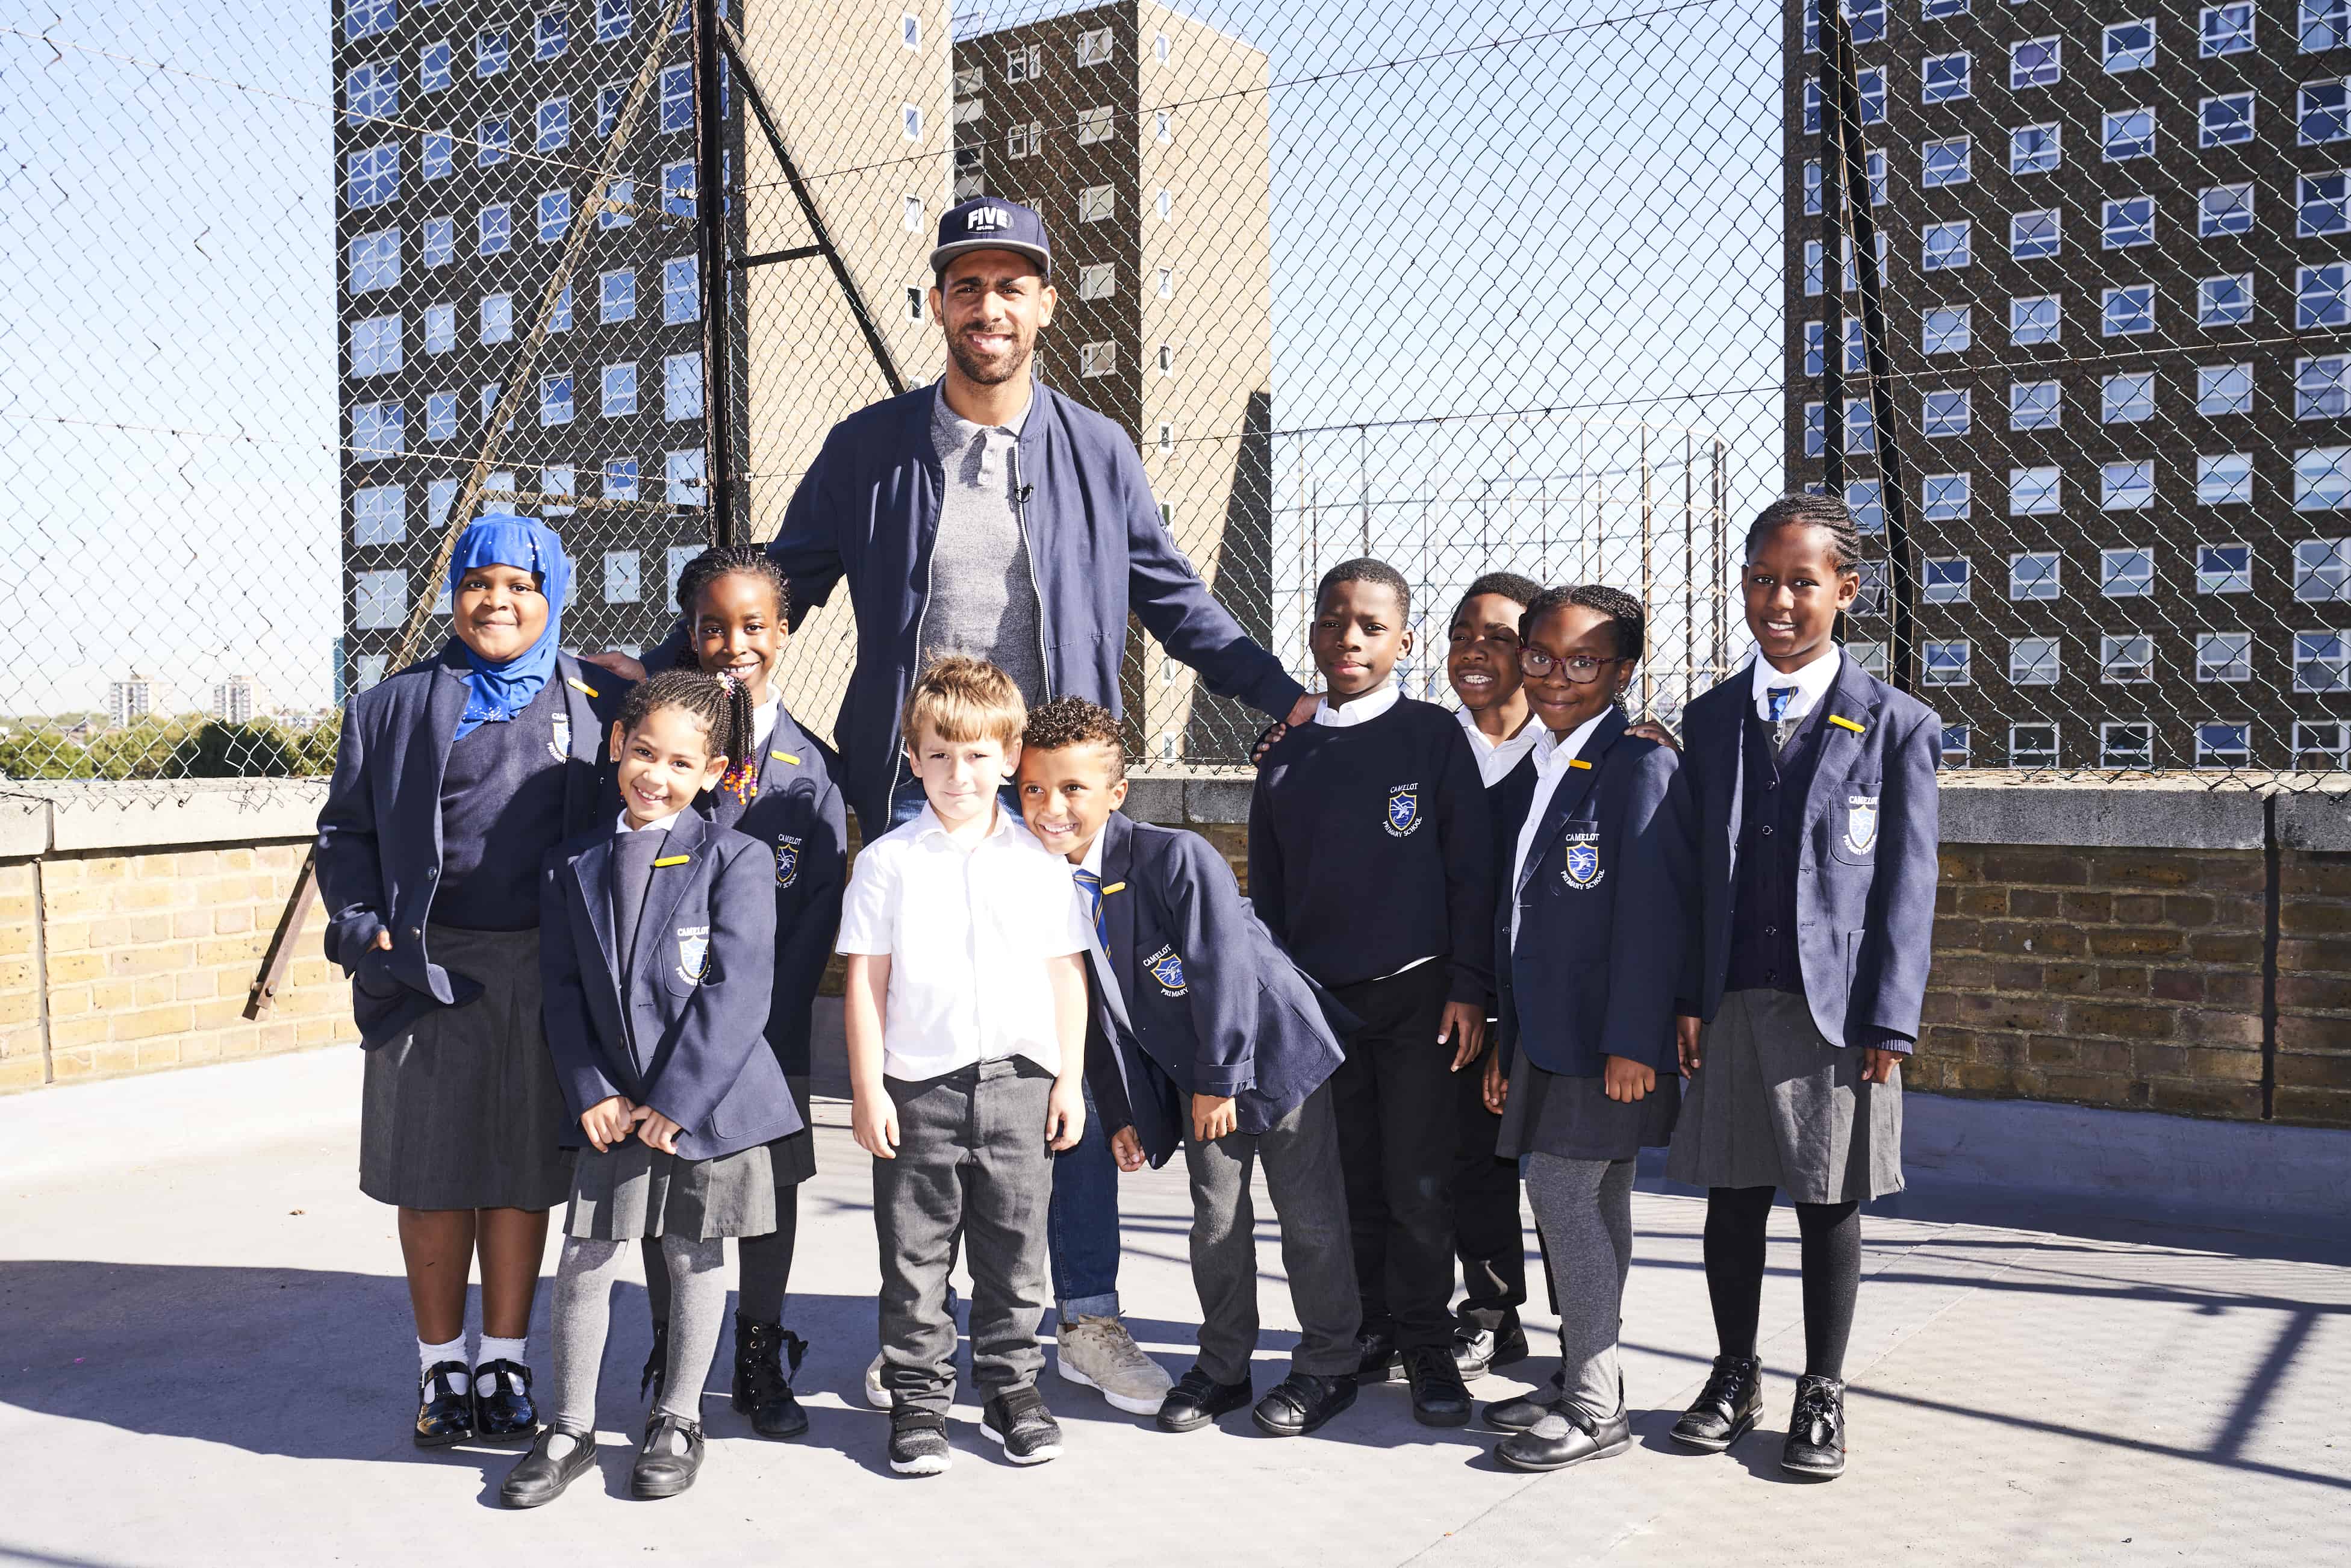 The football star went to the Peckham school to back an internet safety campaign